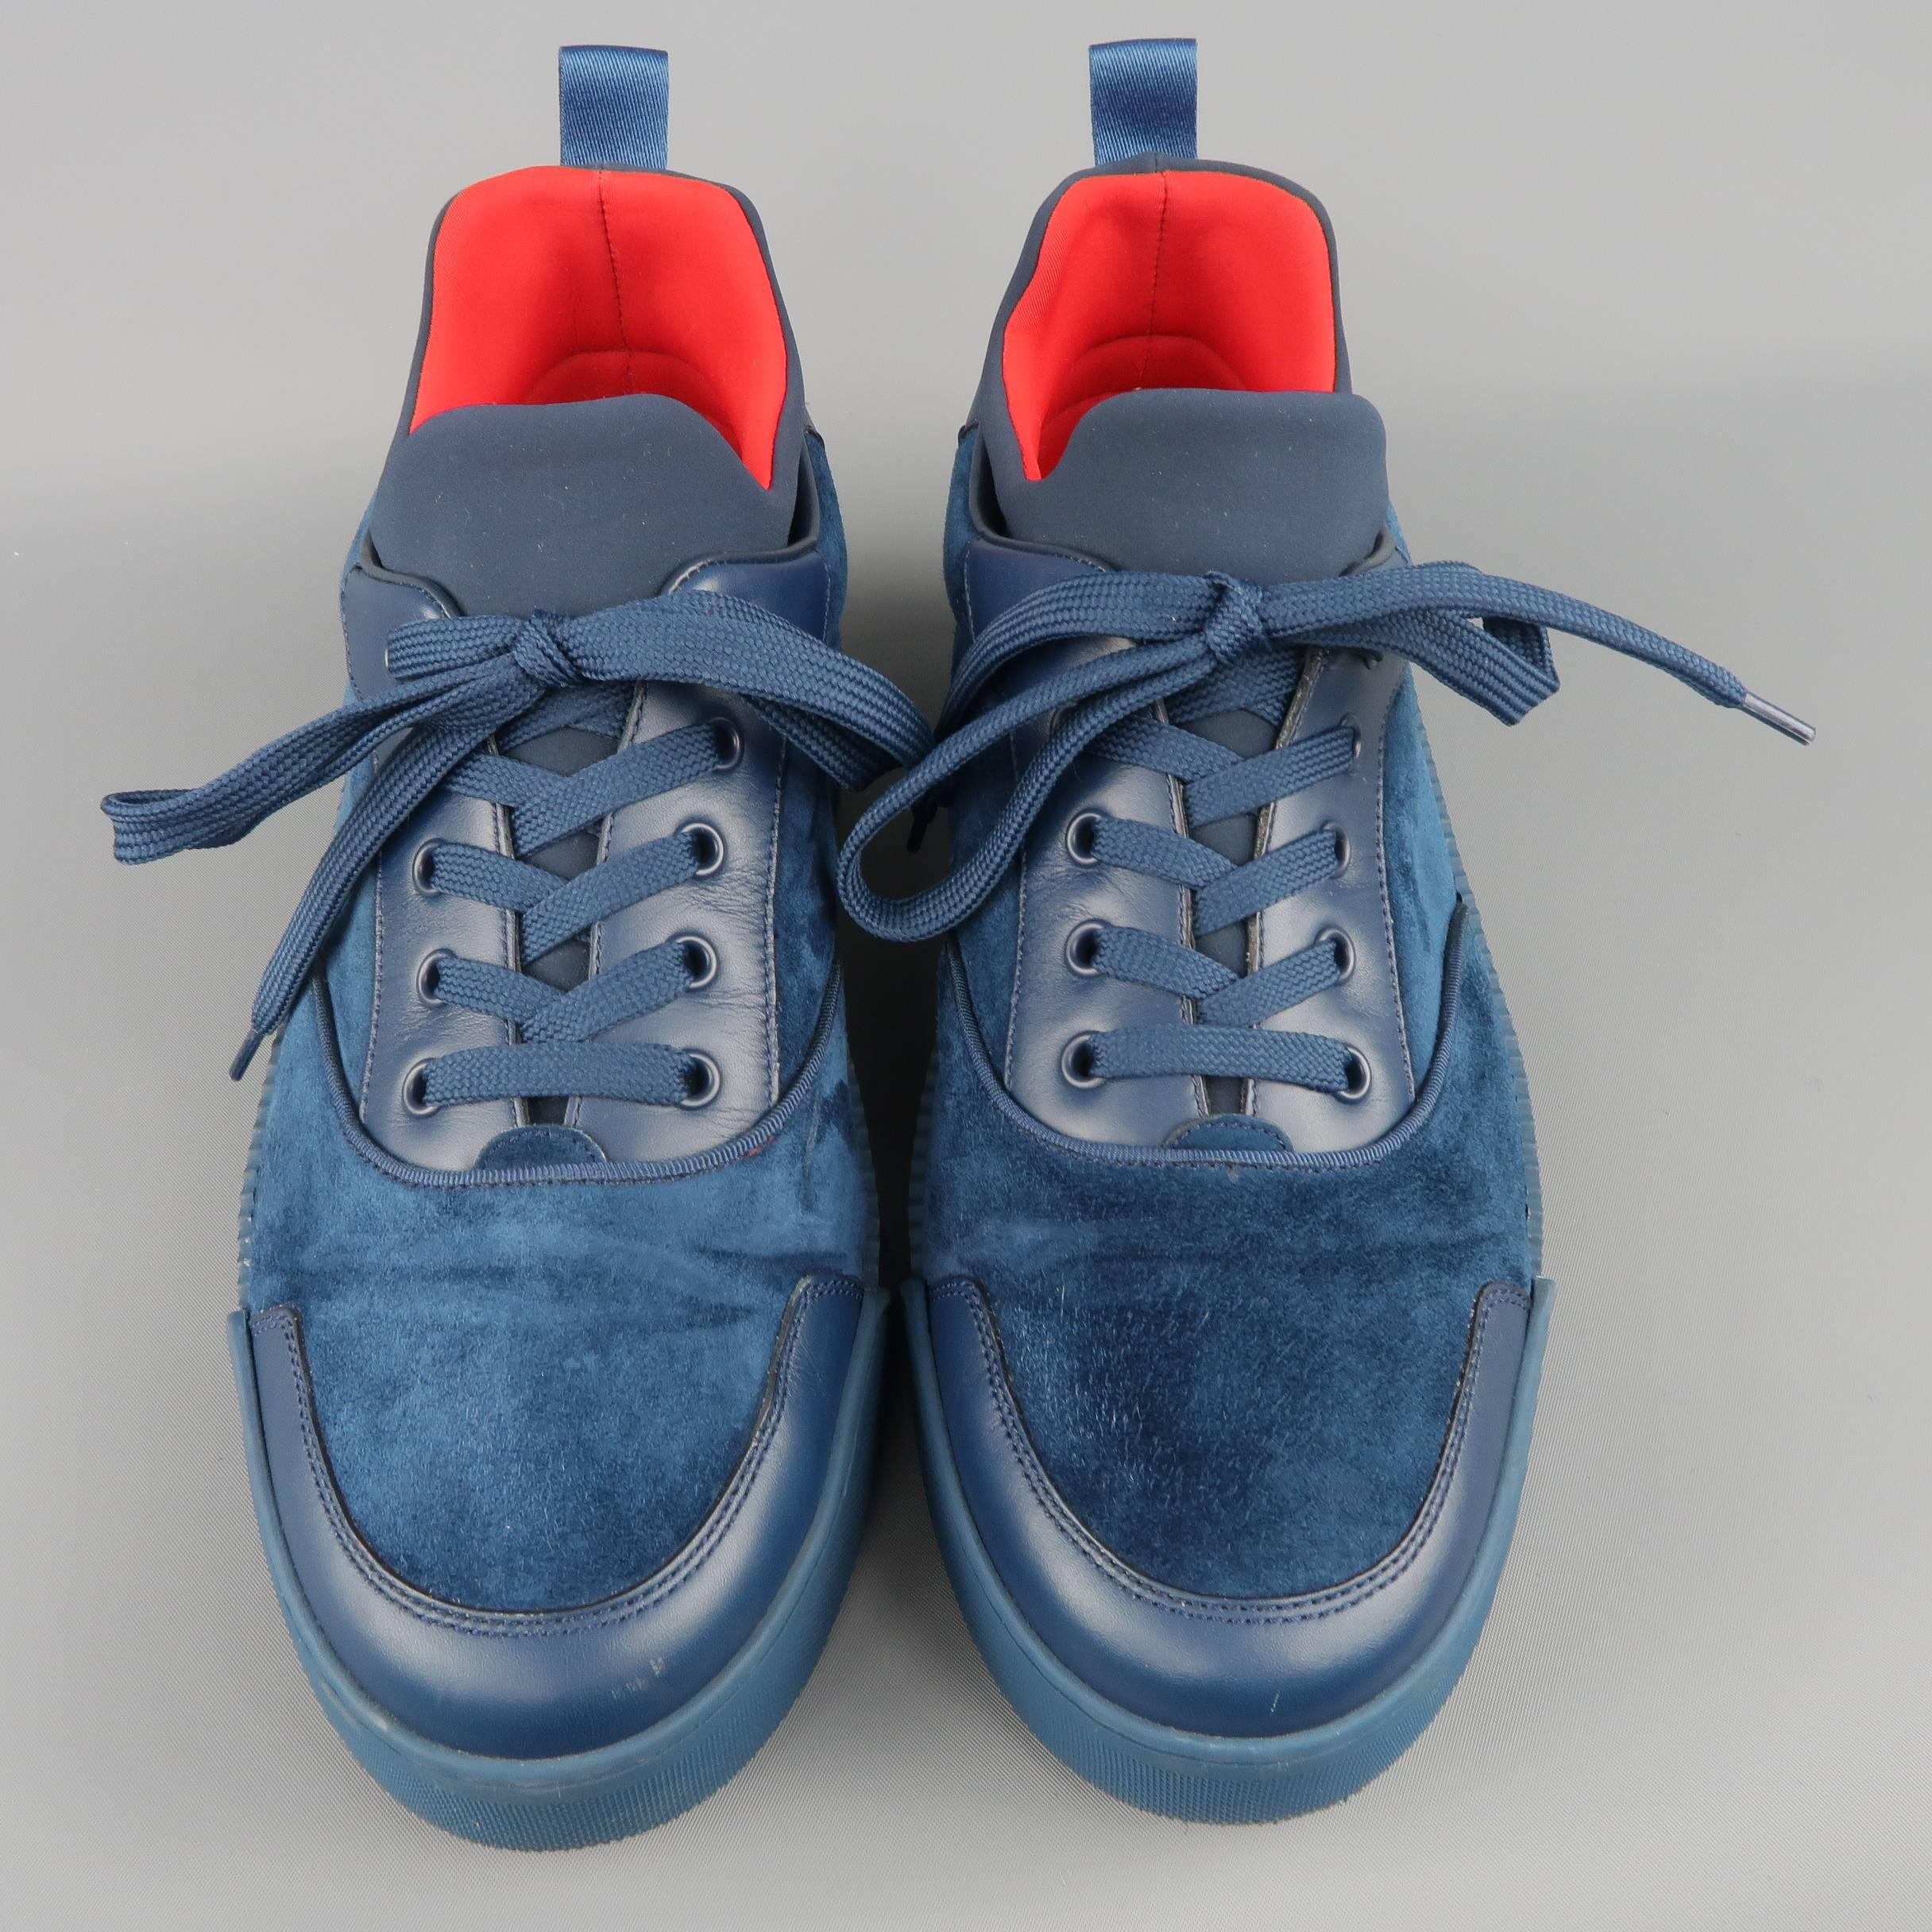 Men's CHRISTIAN LOUBOUTIN Sneakers US 10 Navy Suede and Leather AURELIEN  FLAT at 1stDibs | christian louboutin aurelien flat sneakers, christian  louboutin aurelien flat, navy louboutins